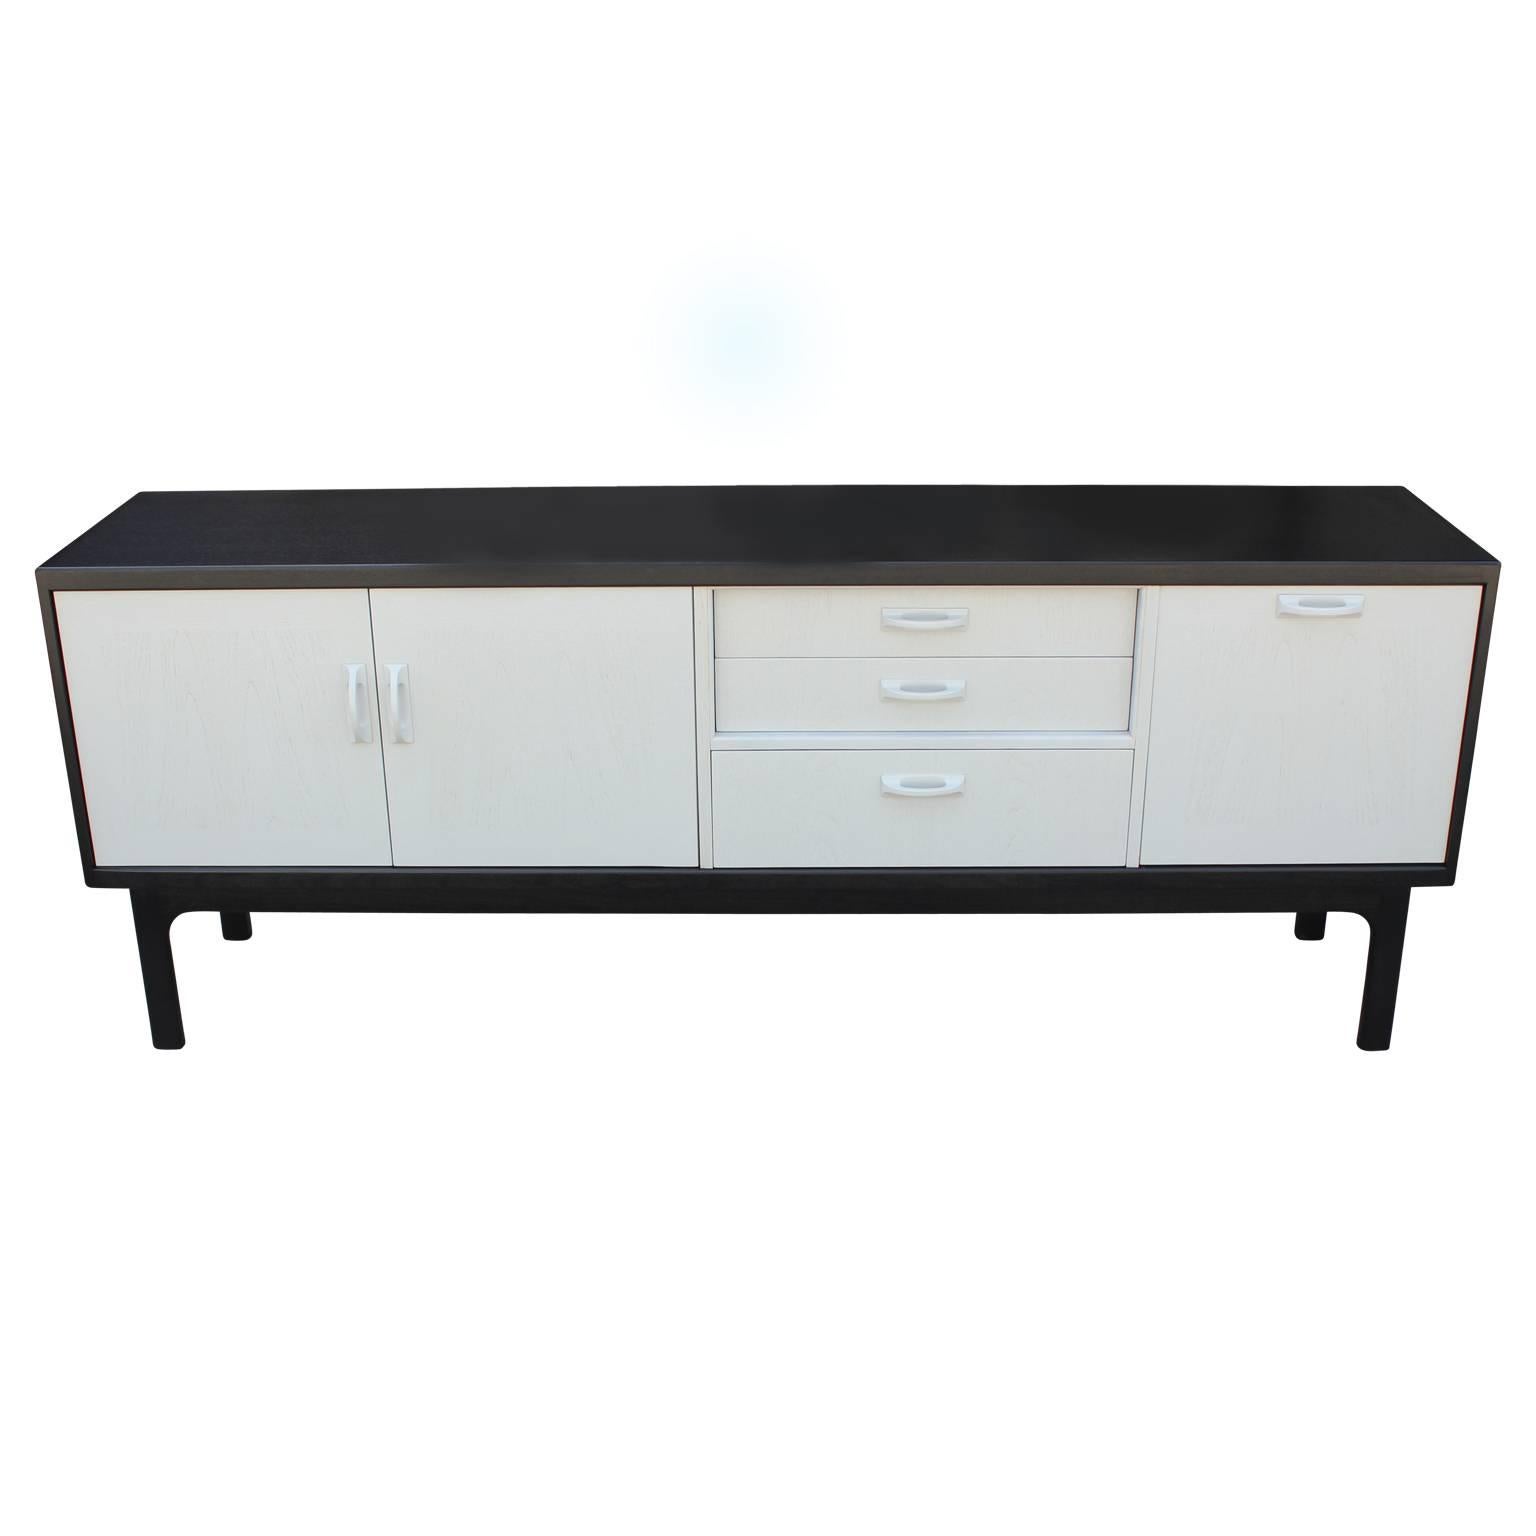 Gorgeous sideboard or credenza that has been restored in lovely black and grey stain. This piece features two cabinet doors that open to reveal a single self, three drawers and a drop door. The top drawer opens to reveal five organizational